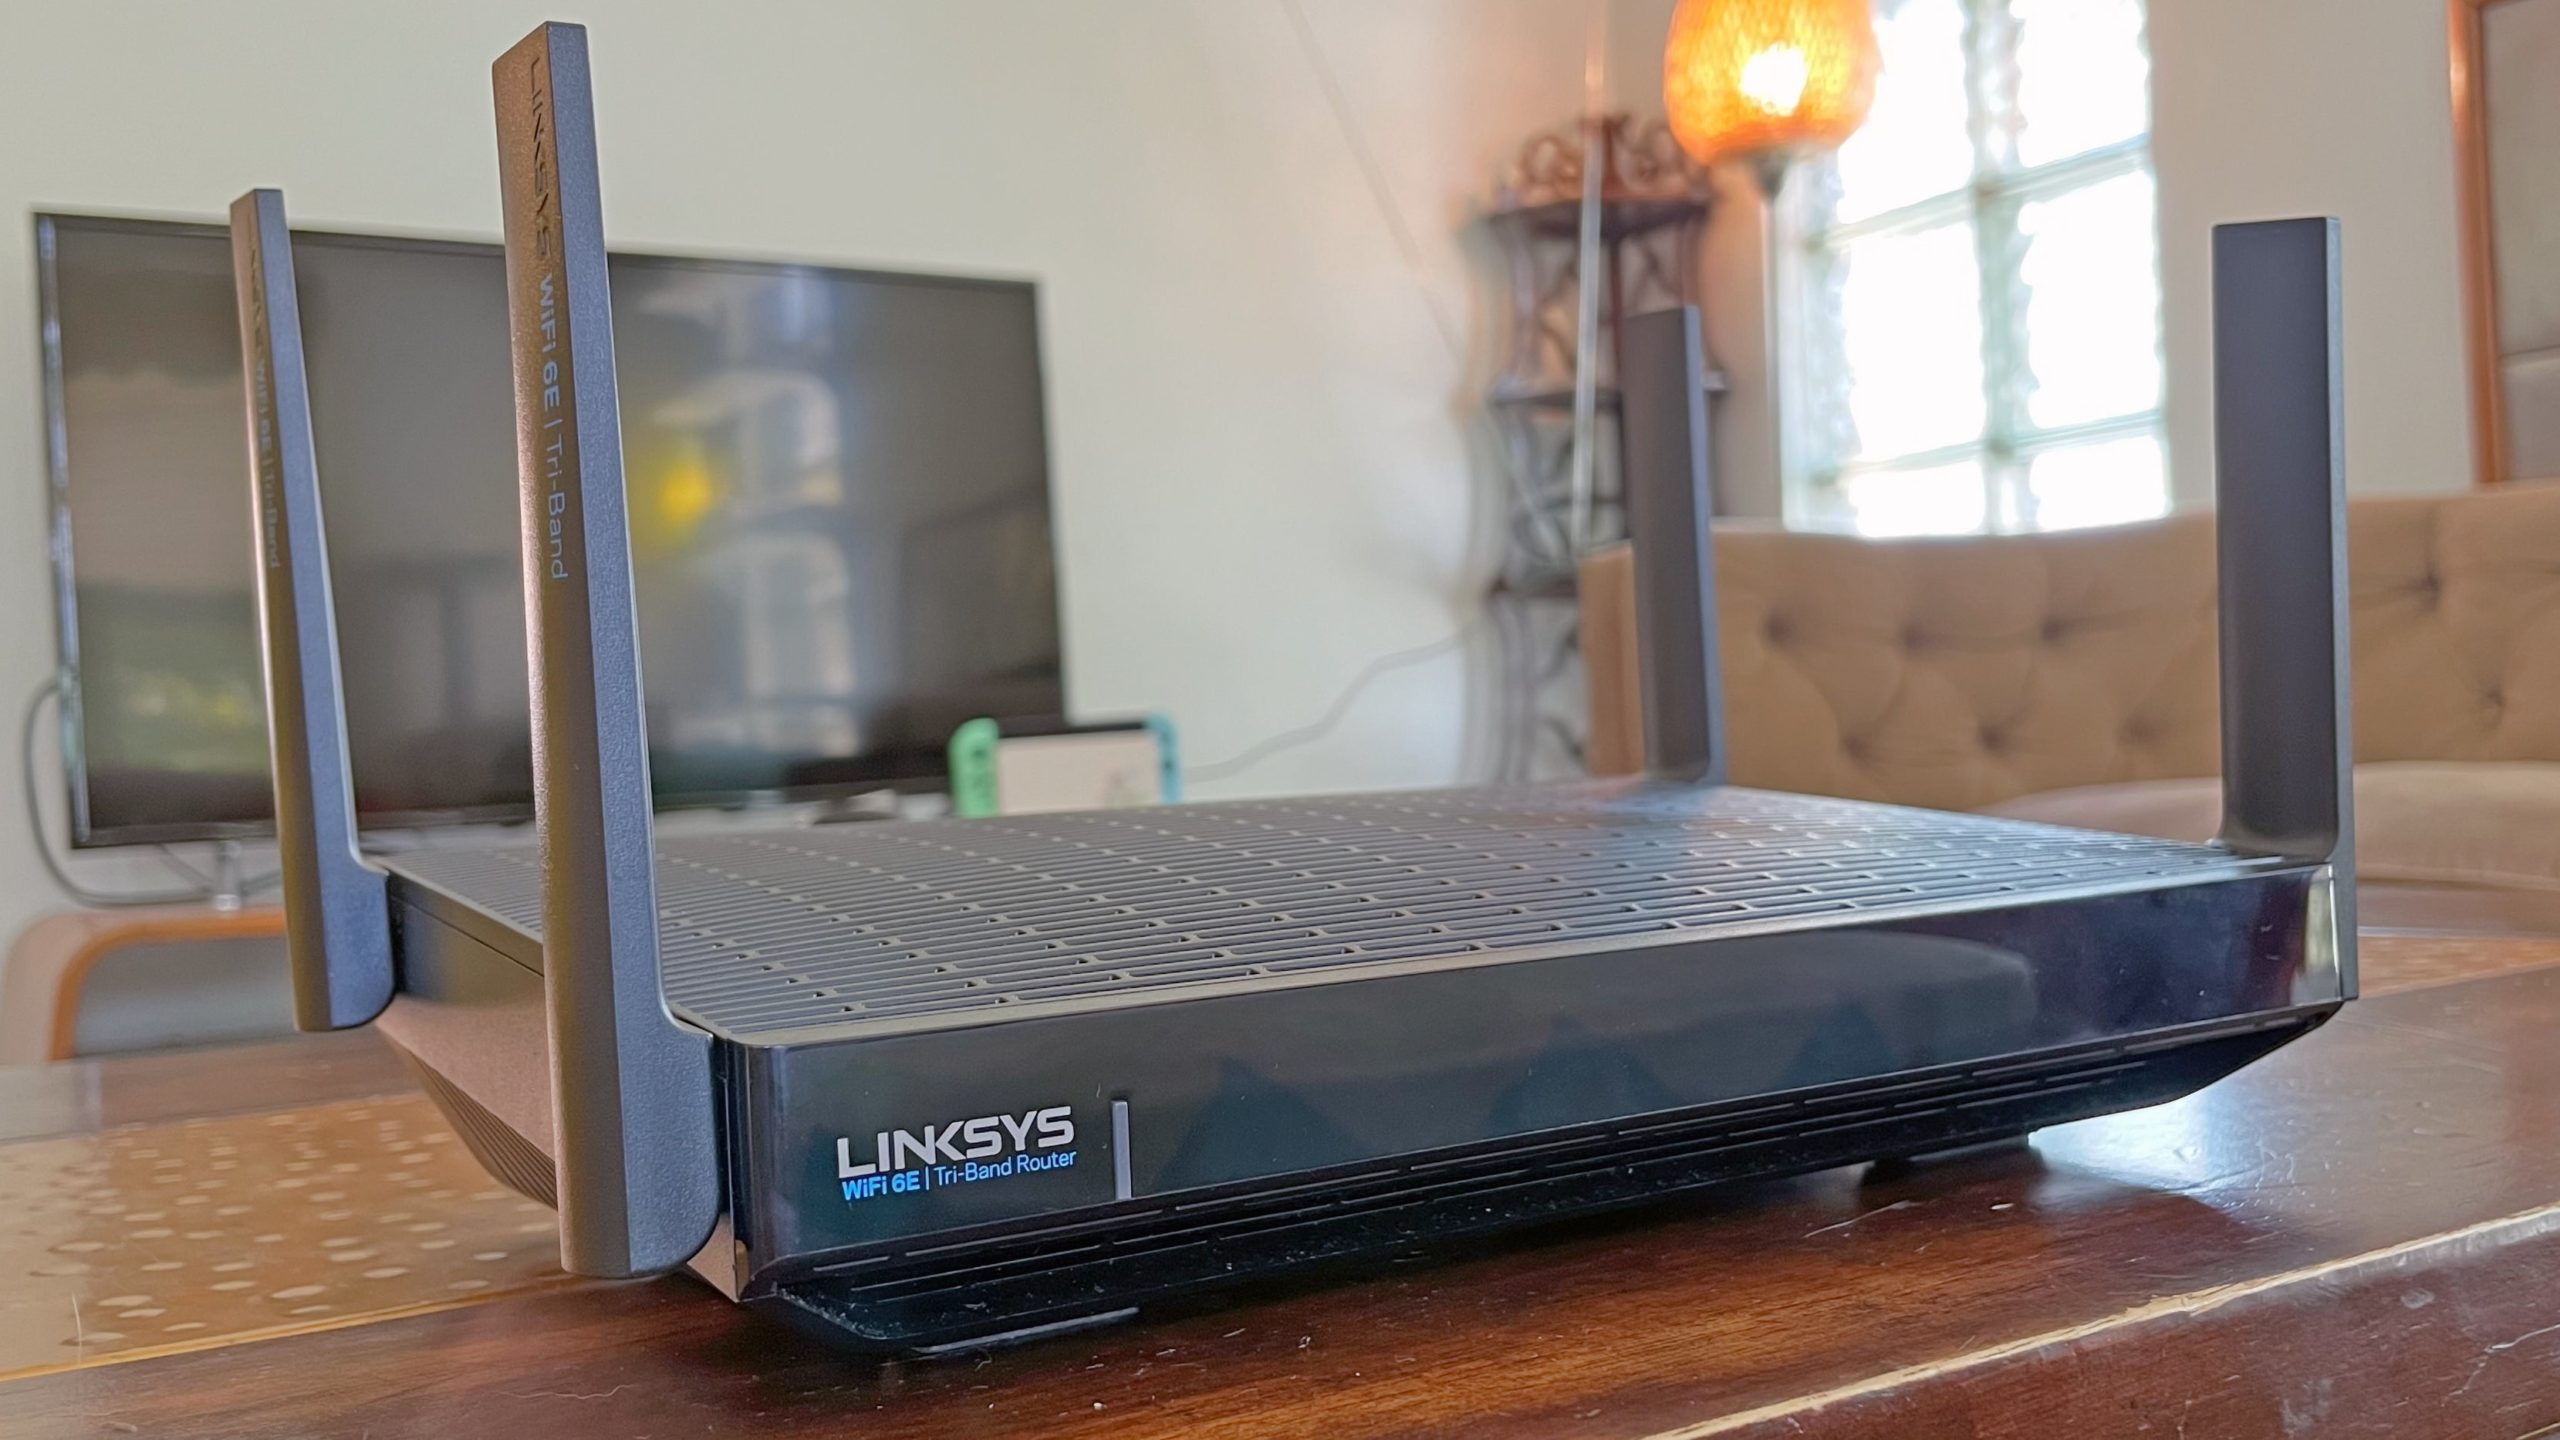 Linksys Hydra Pro has a more subtle design for a router. (Photo: Wes Davis/Gizmodo)